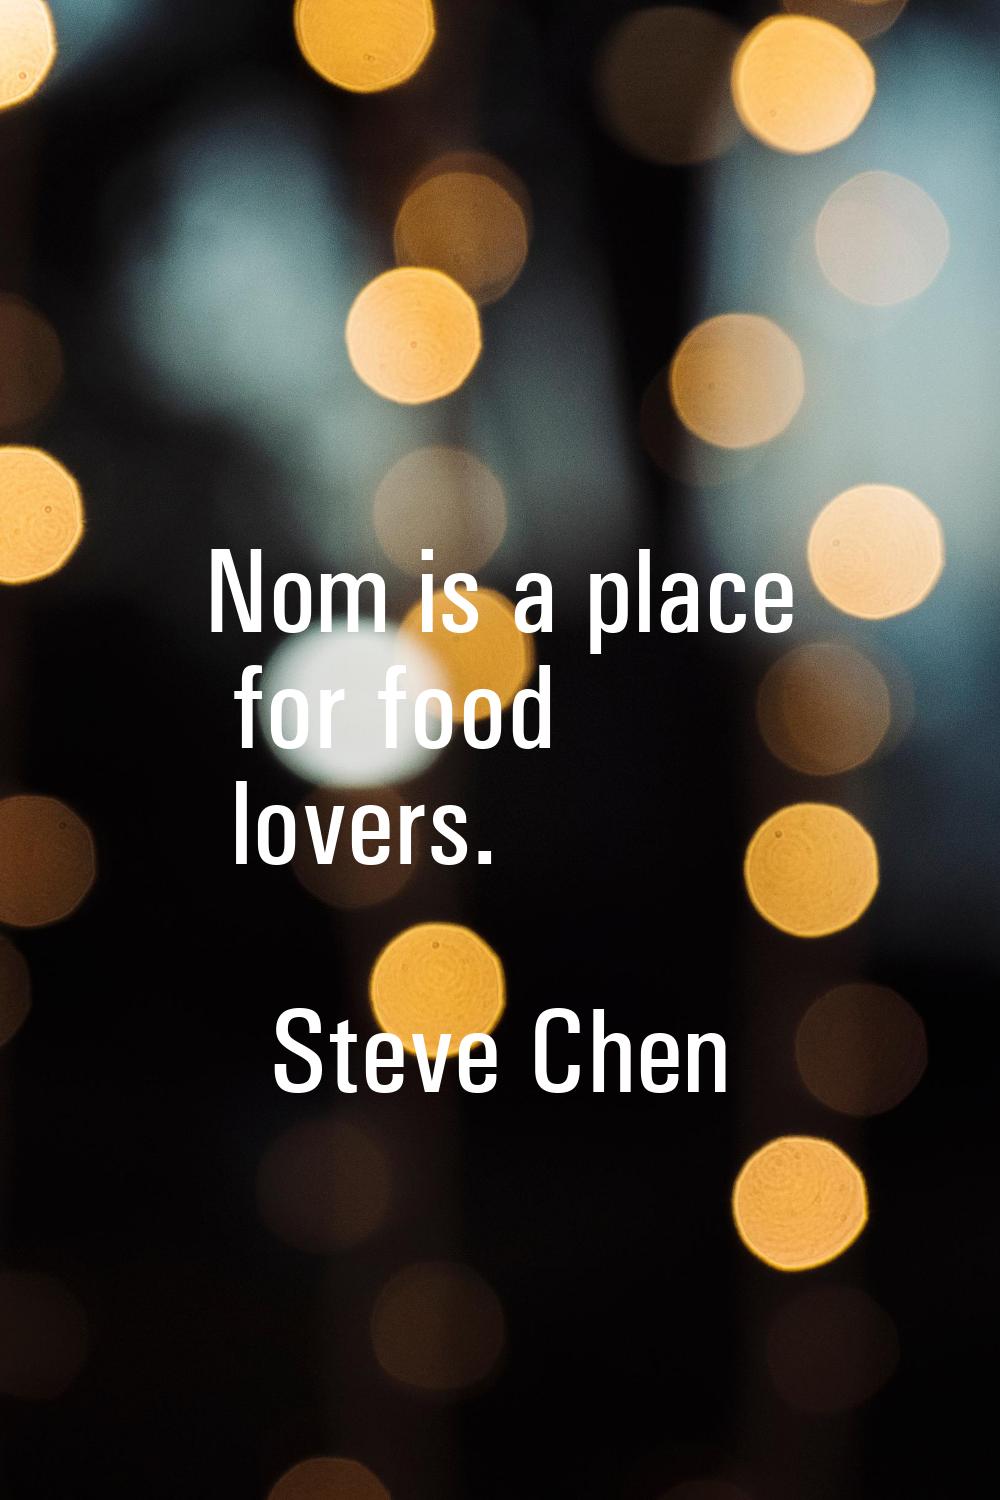 Nom is a place for food lovers.